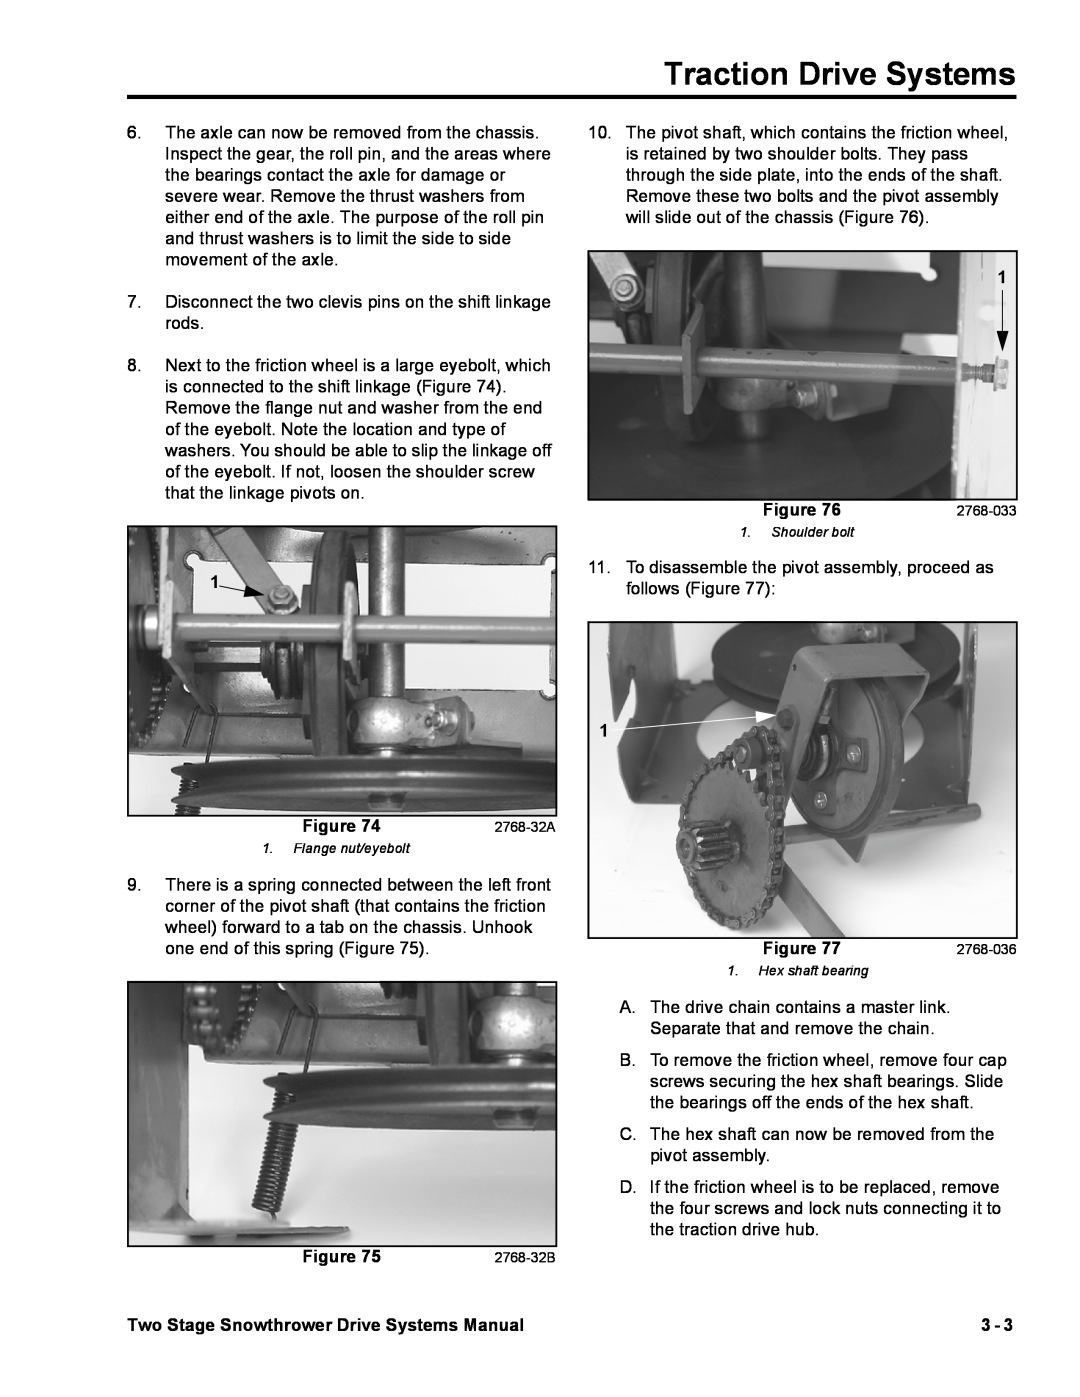 Toro 38065, 38080 manual Traction Drive Systems, Disconnect the two clevis pins on the shift linkage rods 